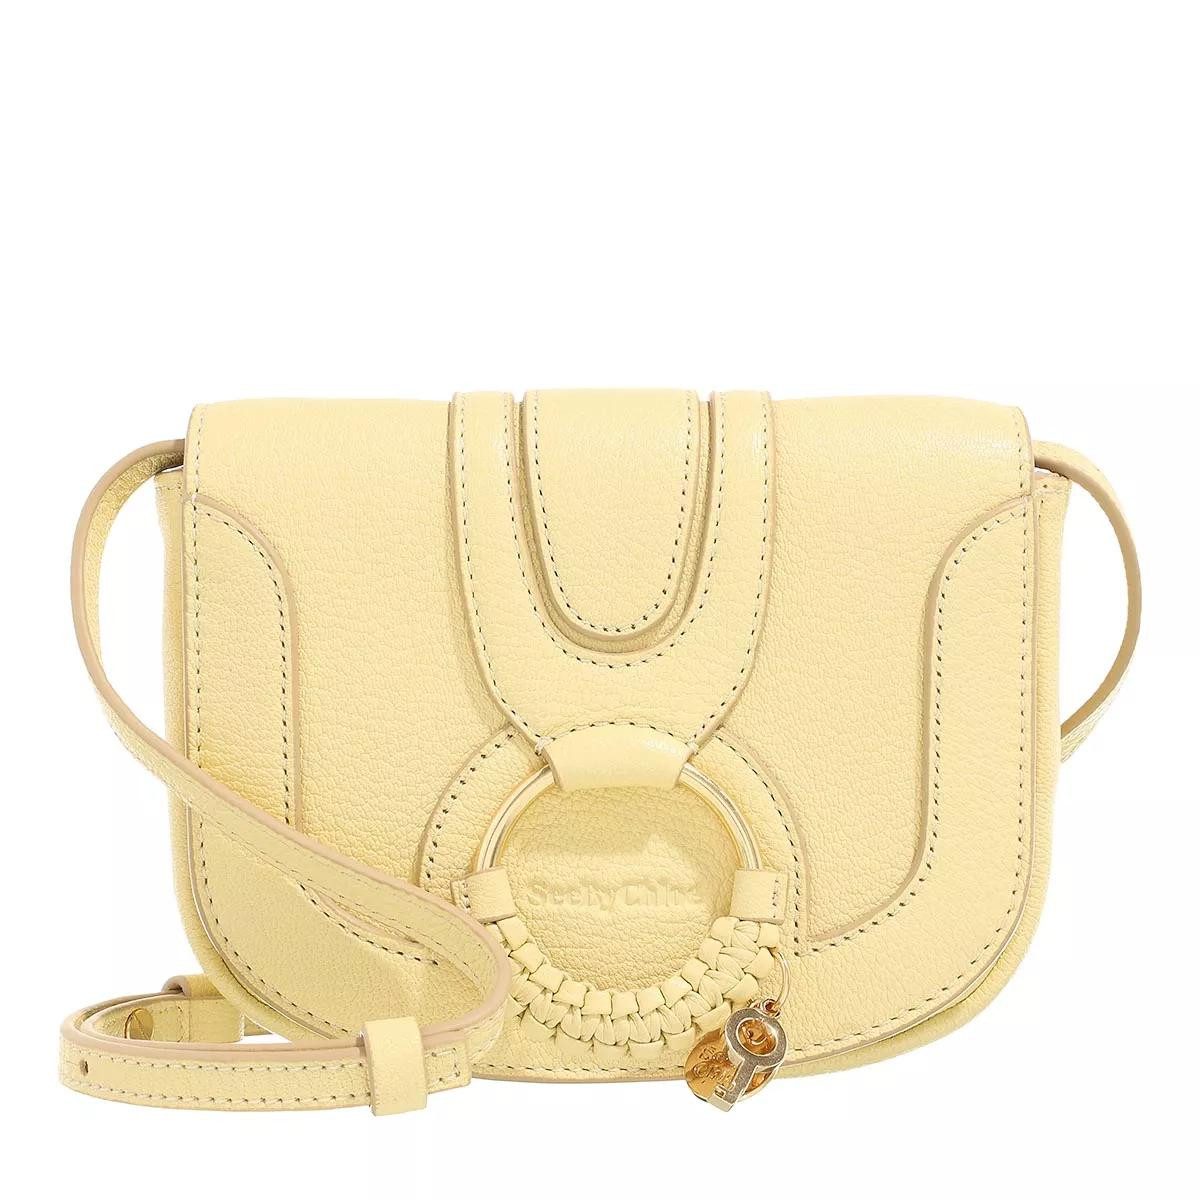 see by chloé Schultertasche yellow (1-tlg)